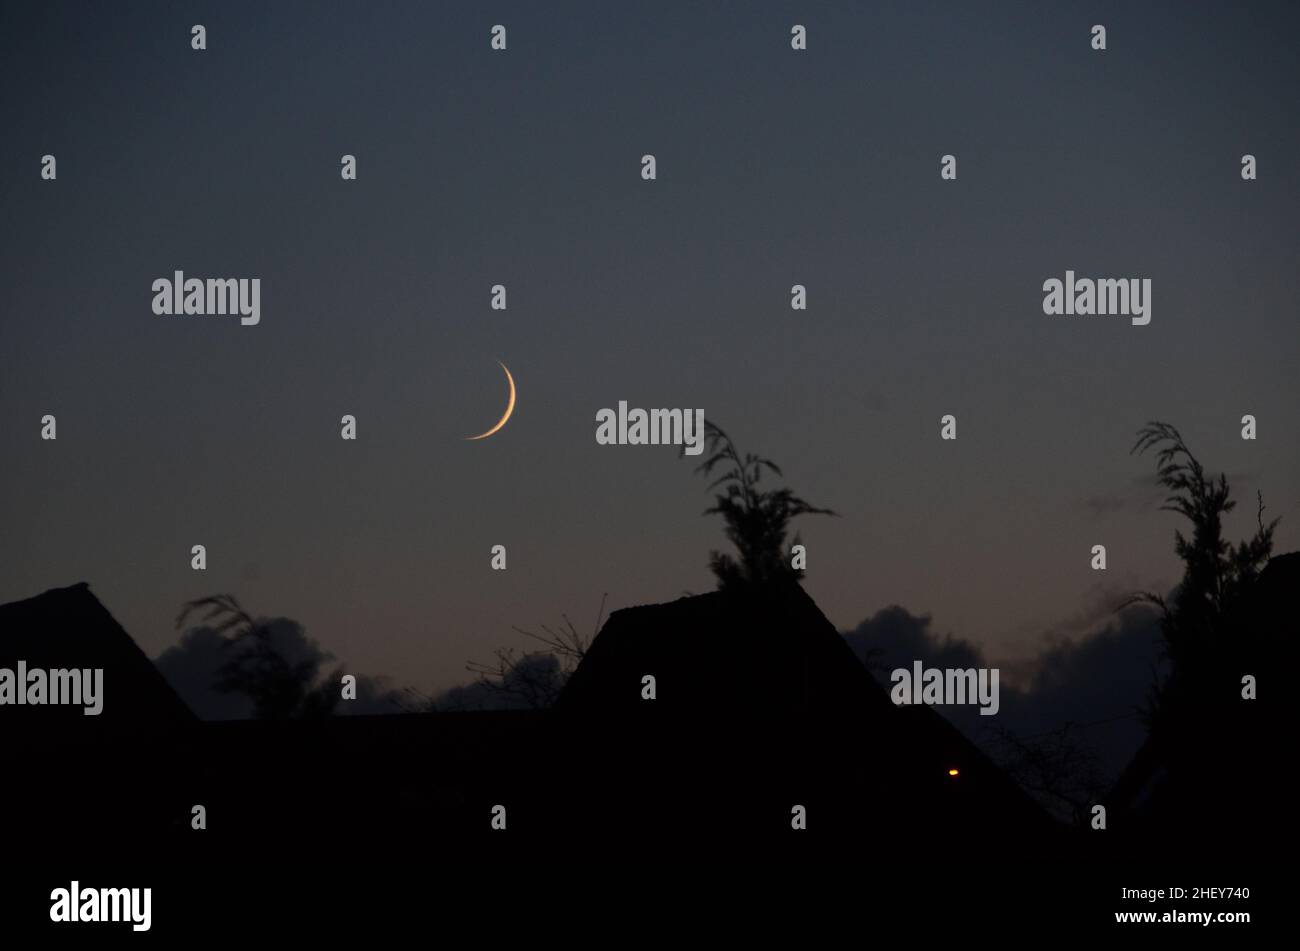 The New Moon seen at dusk over the silhouettes of a settlement. Stock Photo